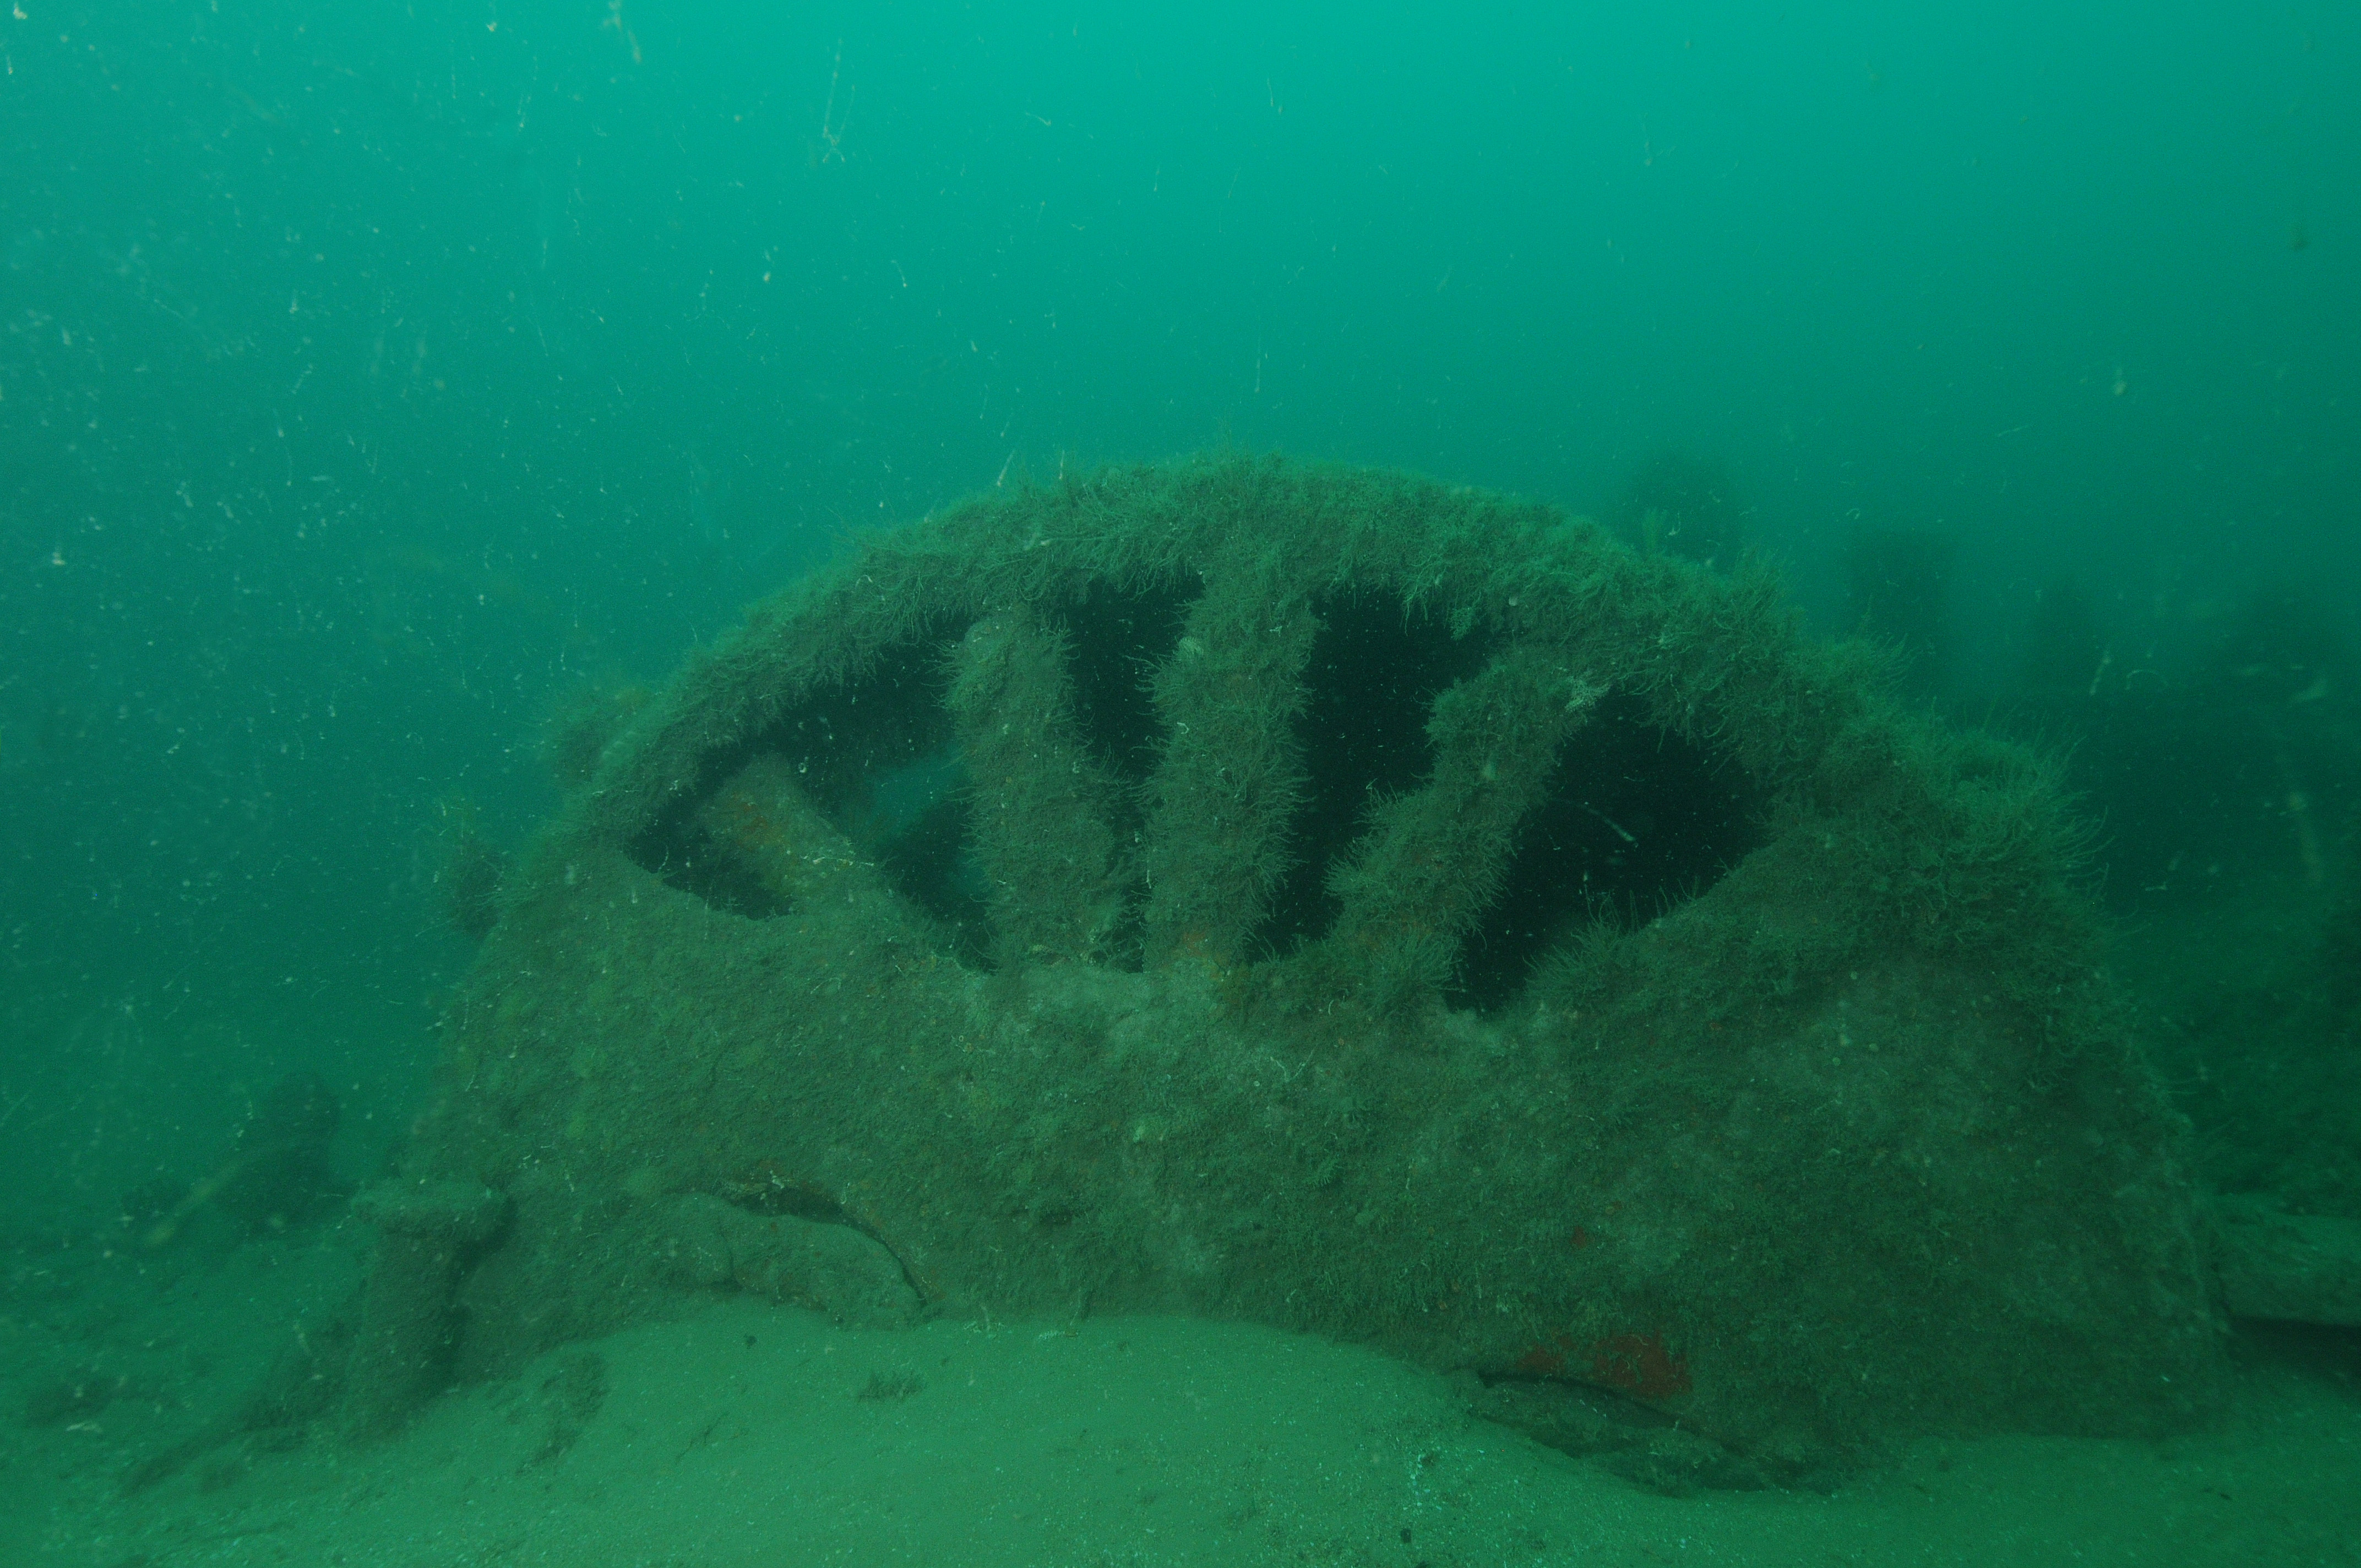 2011, Wessex Archaeology, Wrecks at Sea